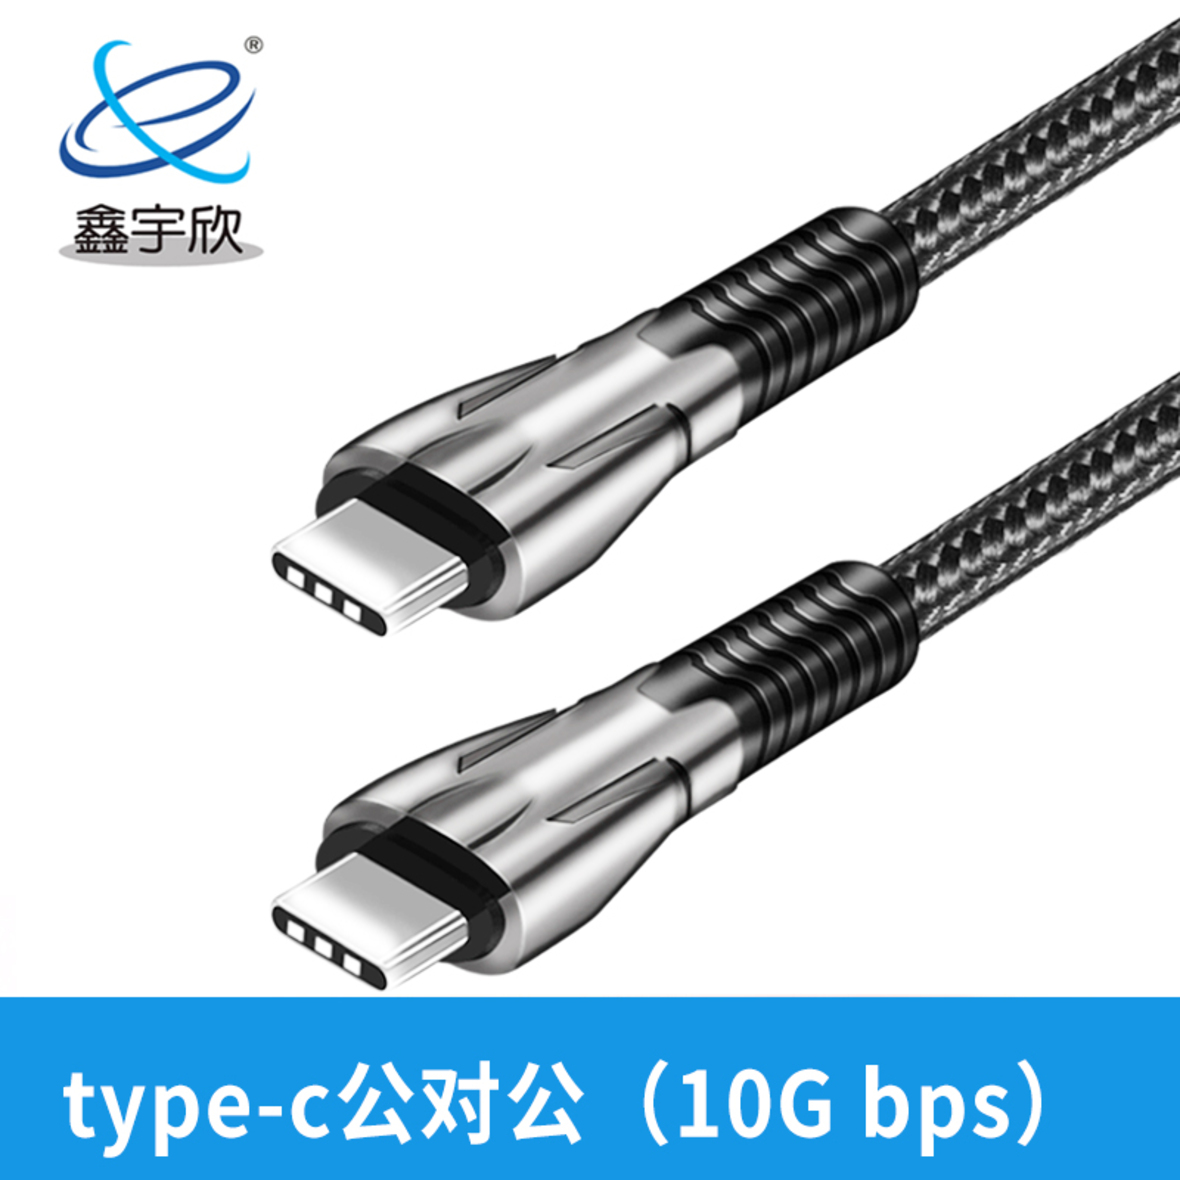  type-c male to male 10G bps zinc alloy shell 5A high current support fast charging braided network cable 100WPD fast charging